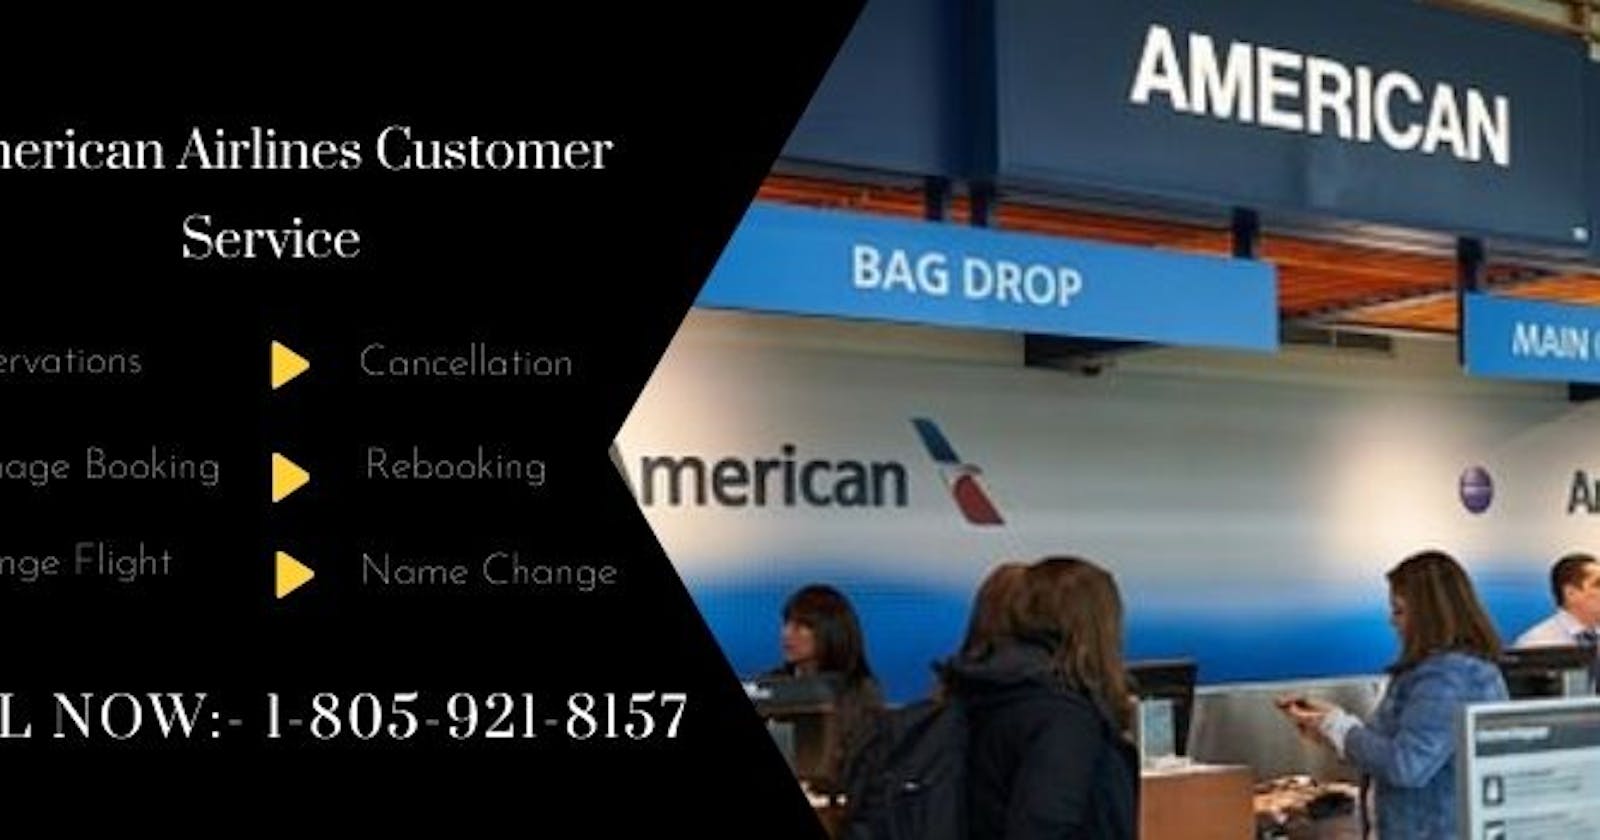 How do I Actually talk to someone at American Airlines Customer Service?